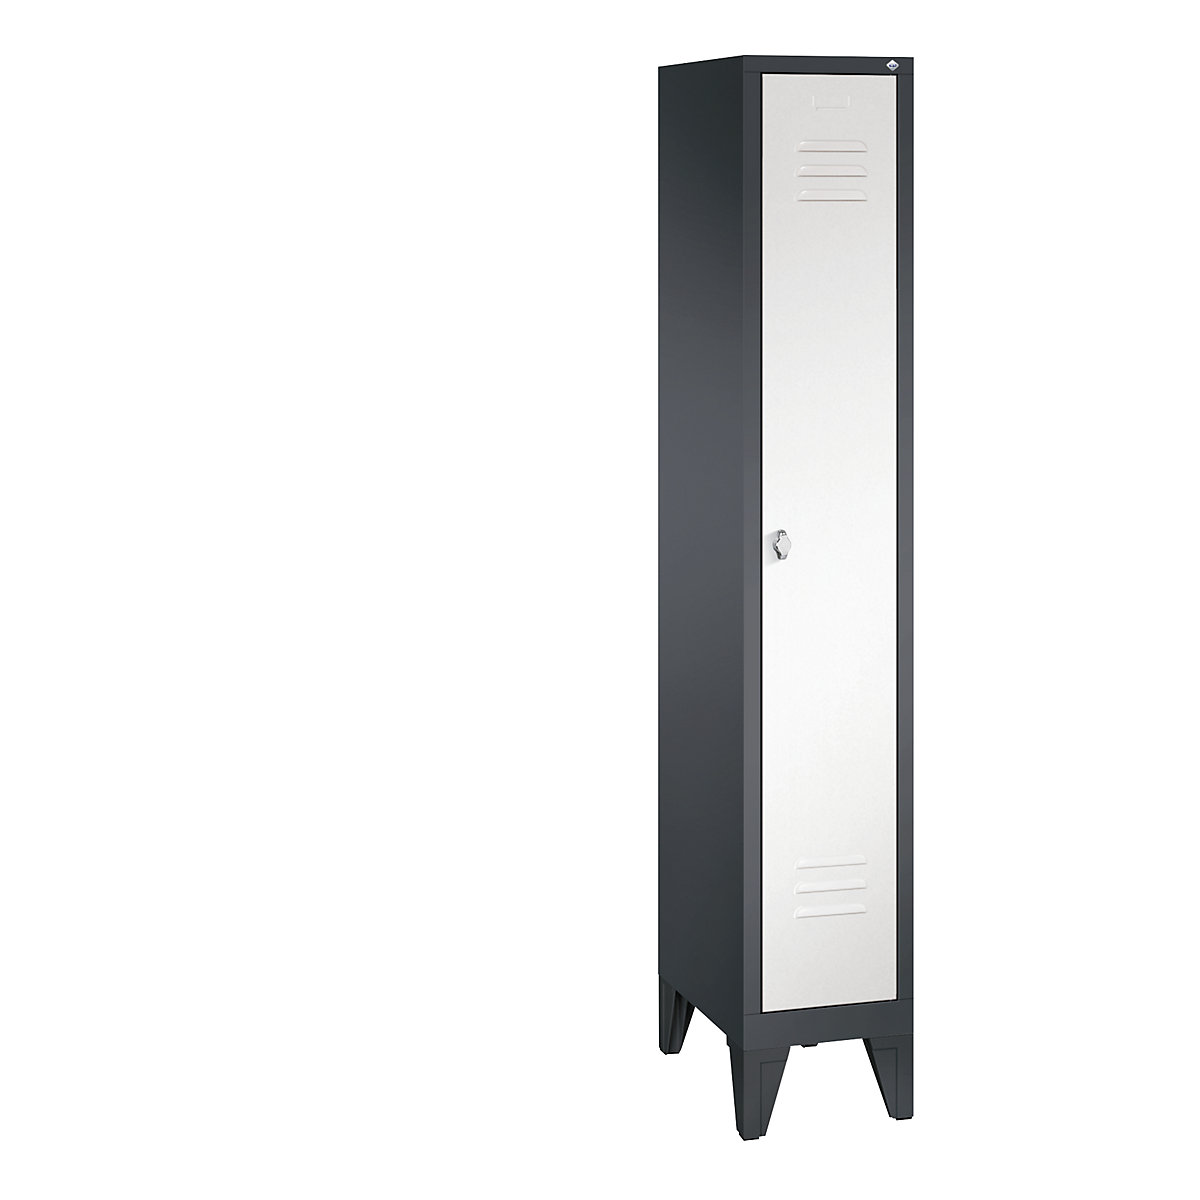 CLASSIC cloakroom locker with feet – C+P, 1 compartment, compartment width 300 mm, black grey / traffic white-12